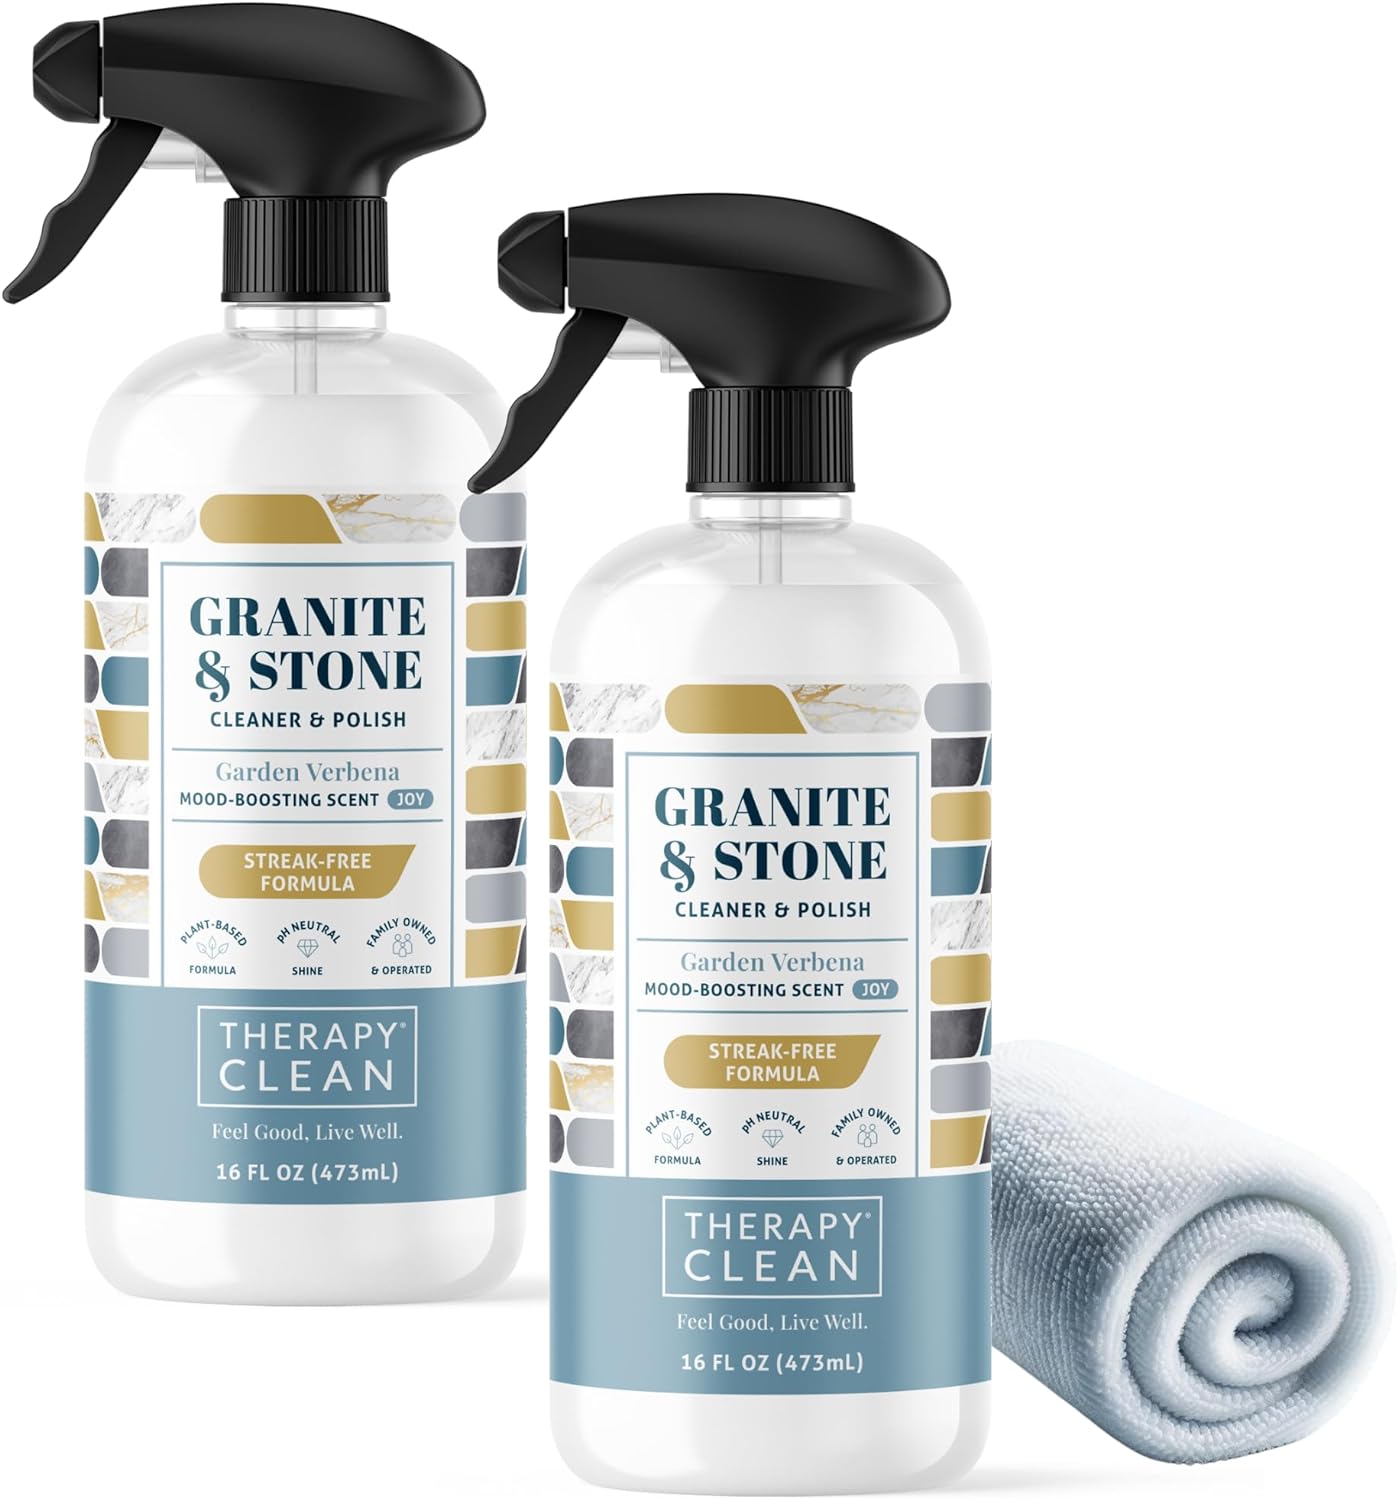 Therapy Granite & Stone Cleaner & Polish Kit (2 Pack - With Microfiber)